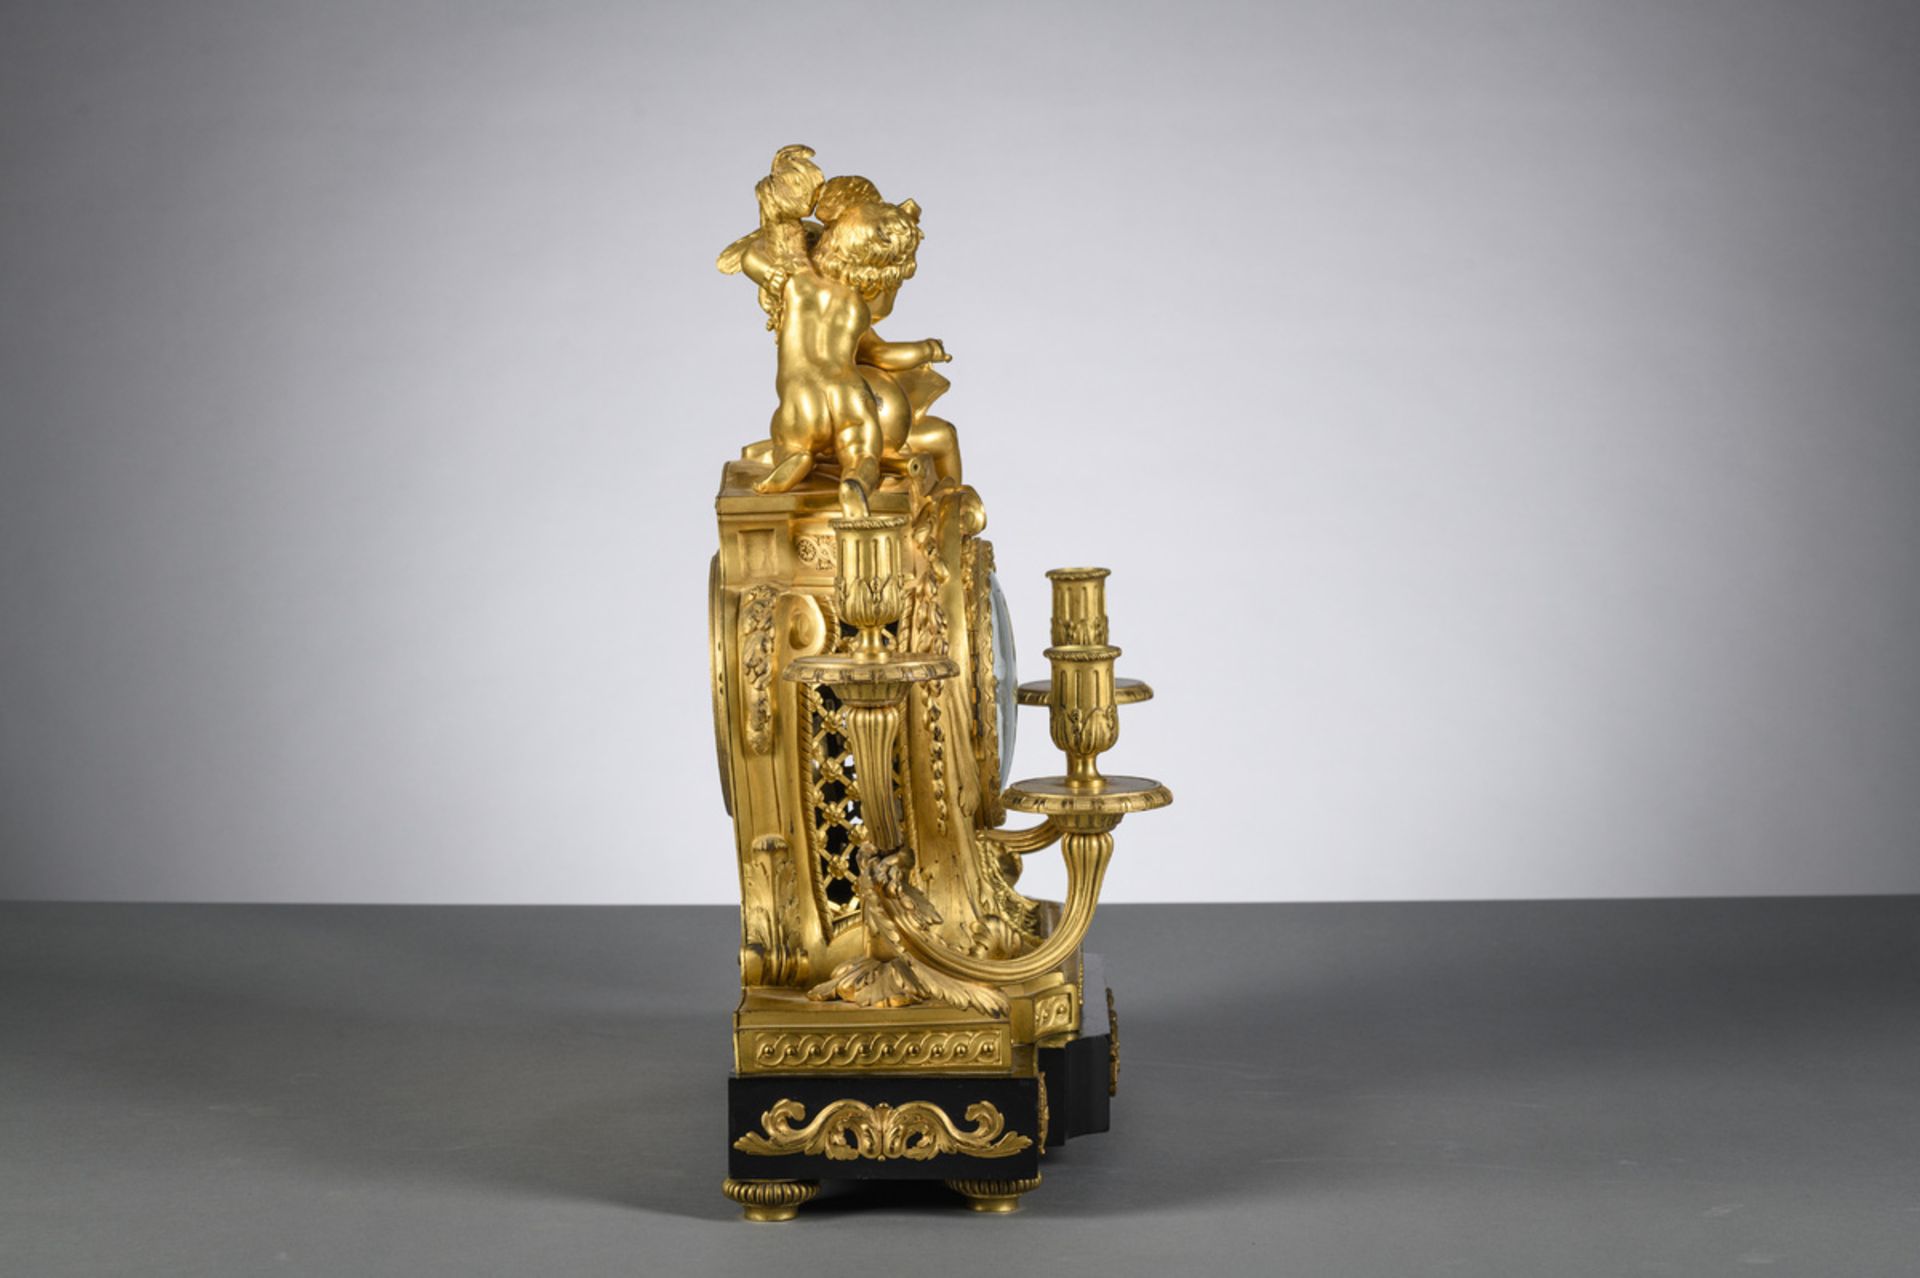 Louis XV clock in gilt bronze with wooden base, by F. Berthoud à Paris (58x71x24) - Image 2 of 7